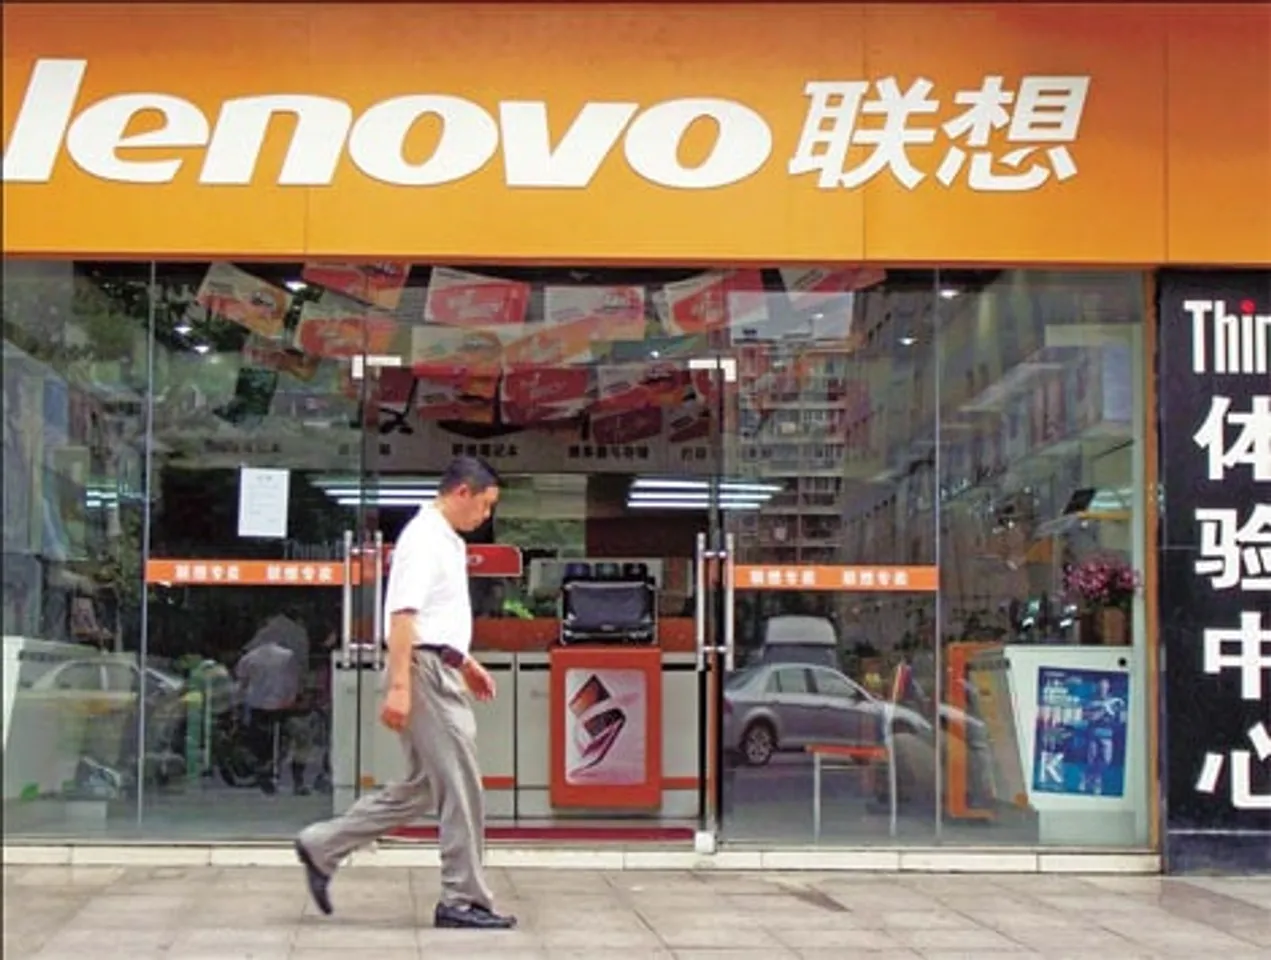 Lenovo is number 2 smartphone brand in India: Report